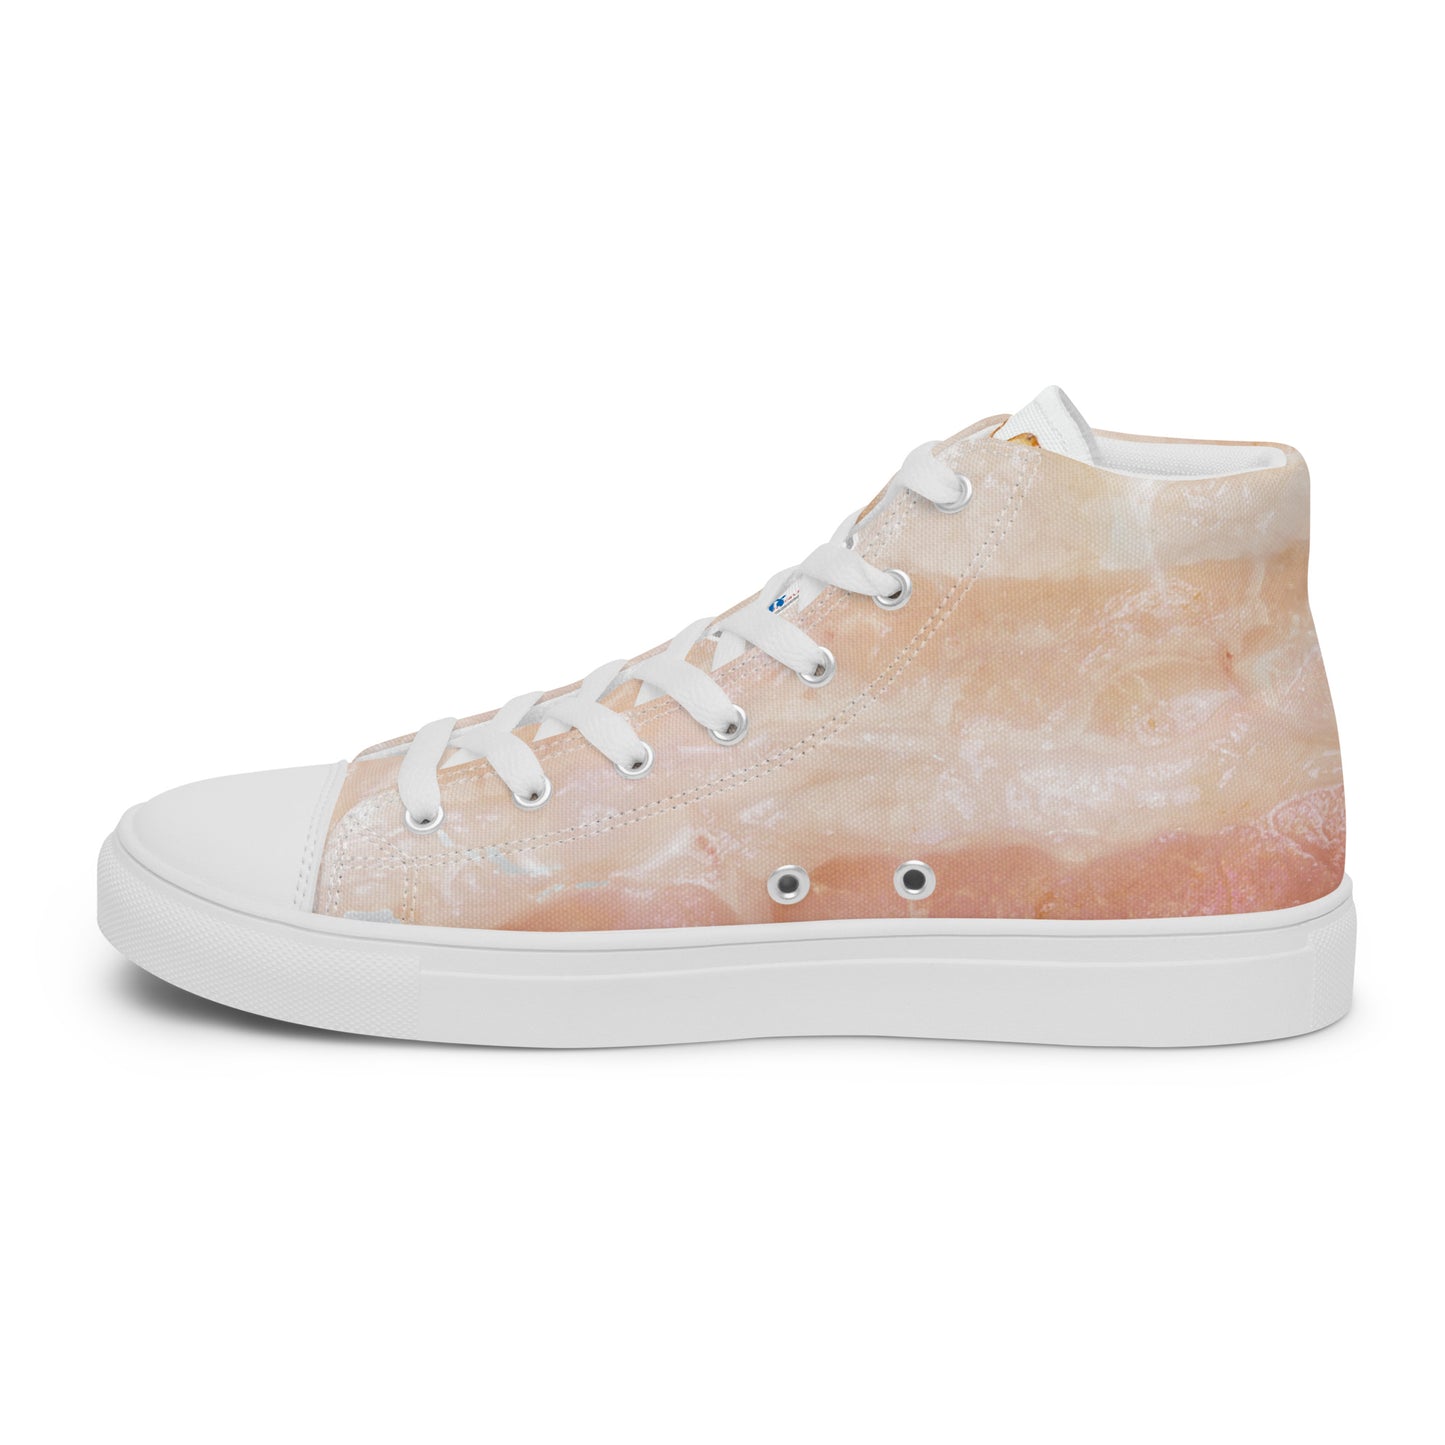 IGNITAS by DOLVING - Men’s high top canvas shoes